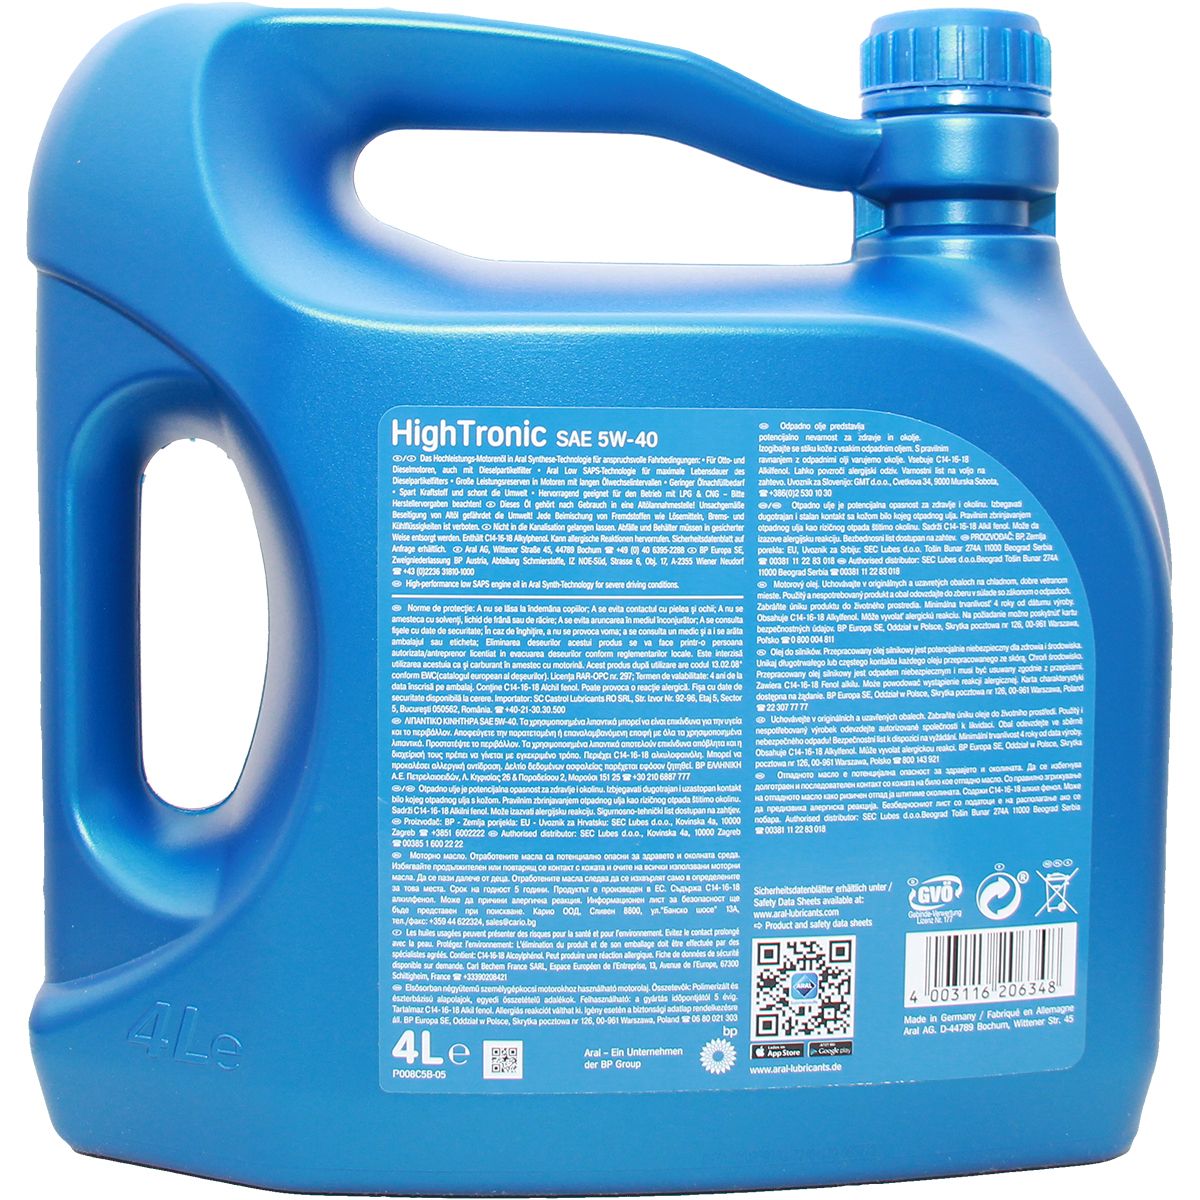 Aral HighTronic 5W-40 4 Liter